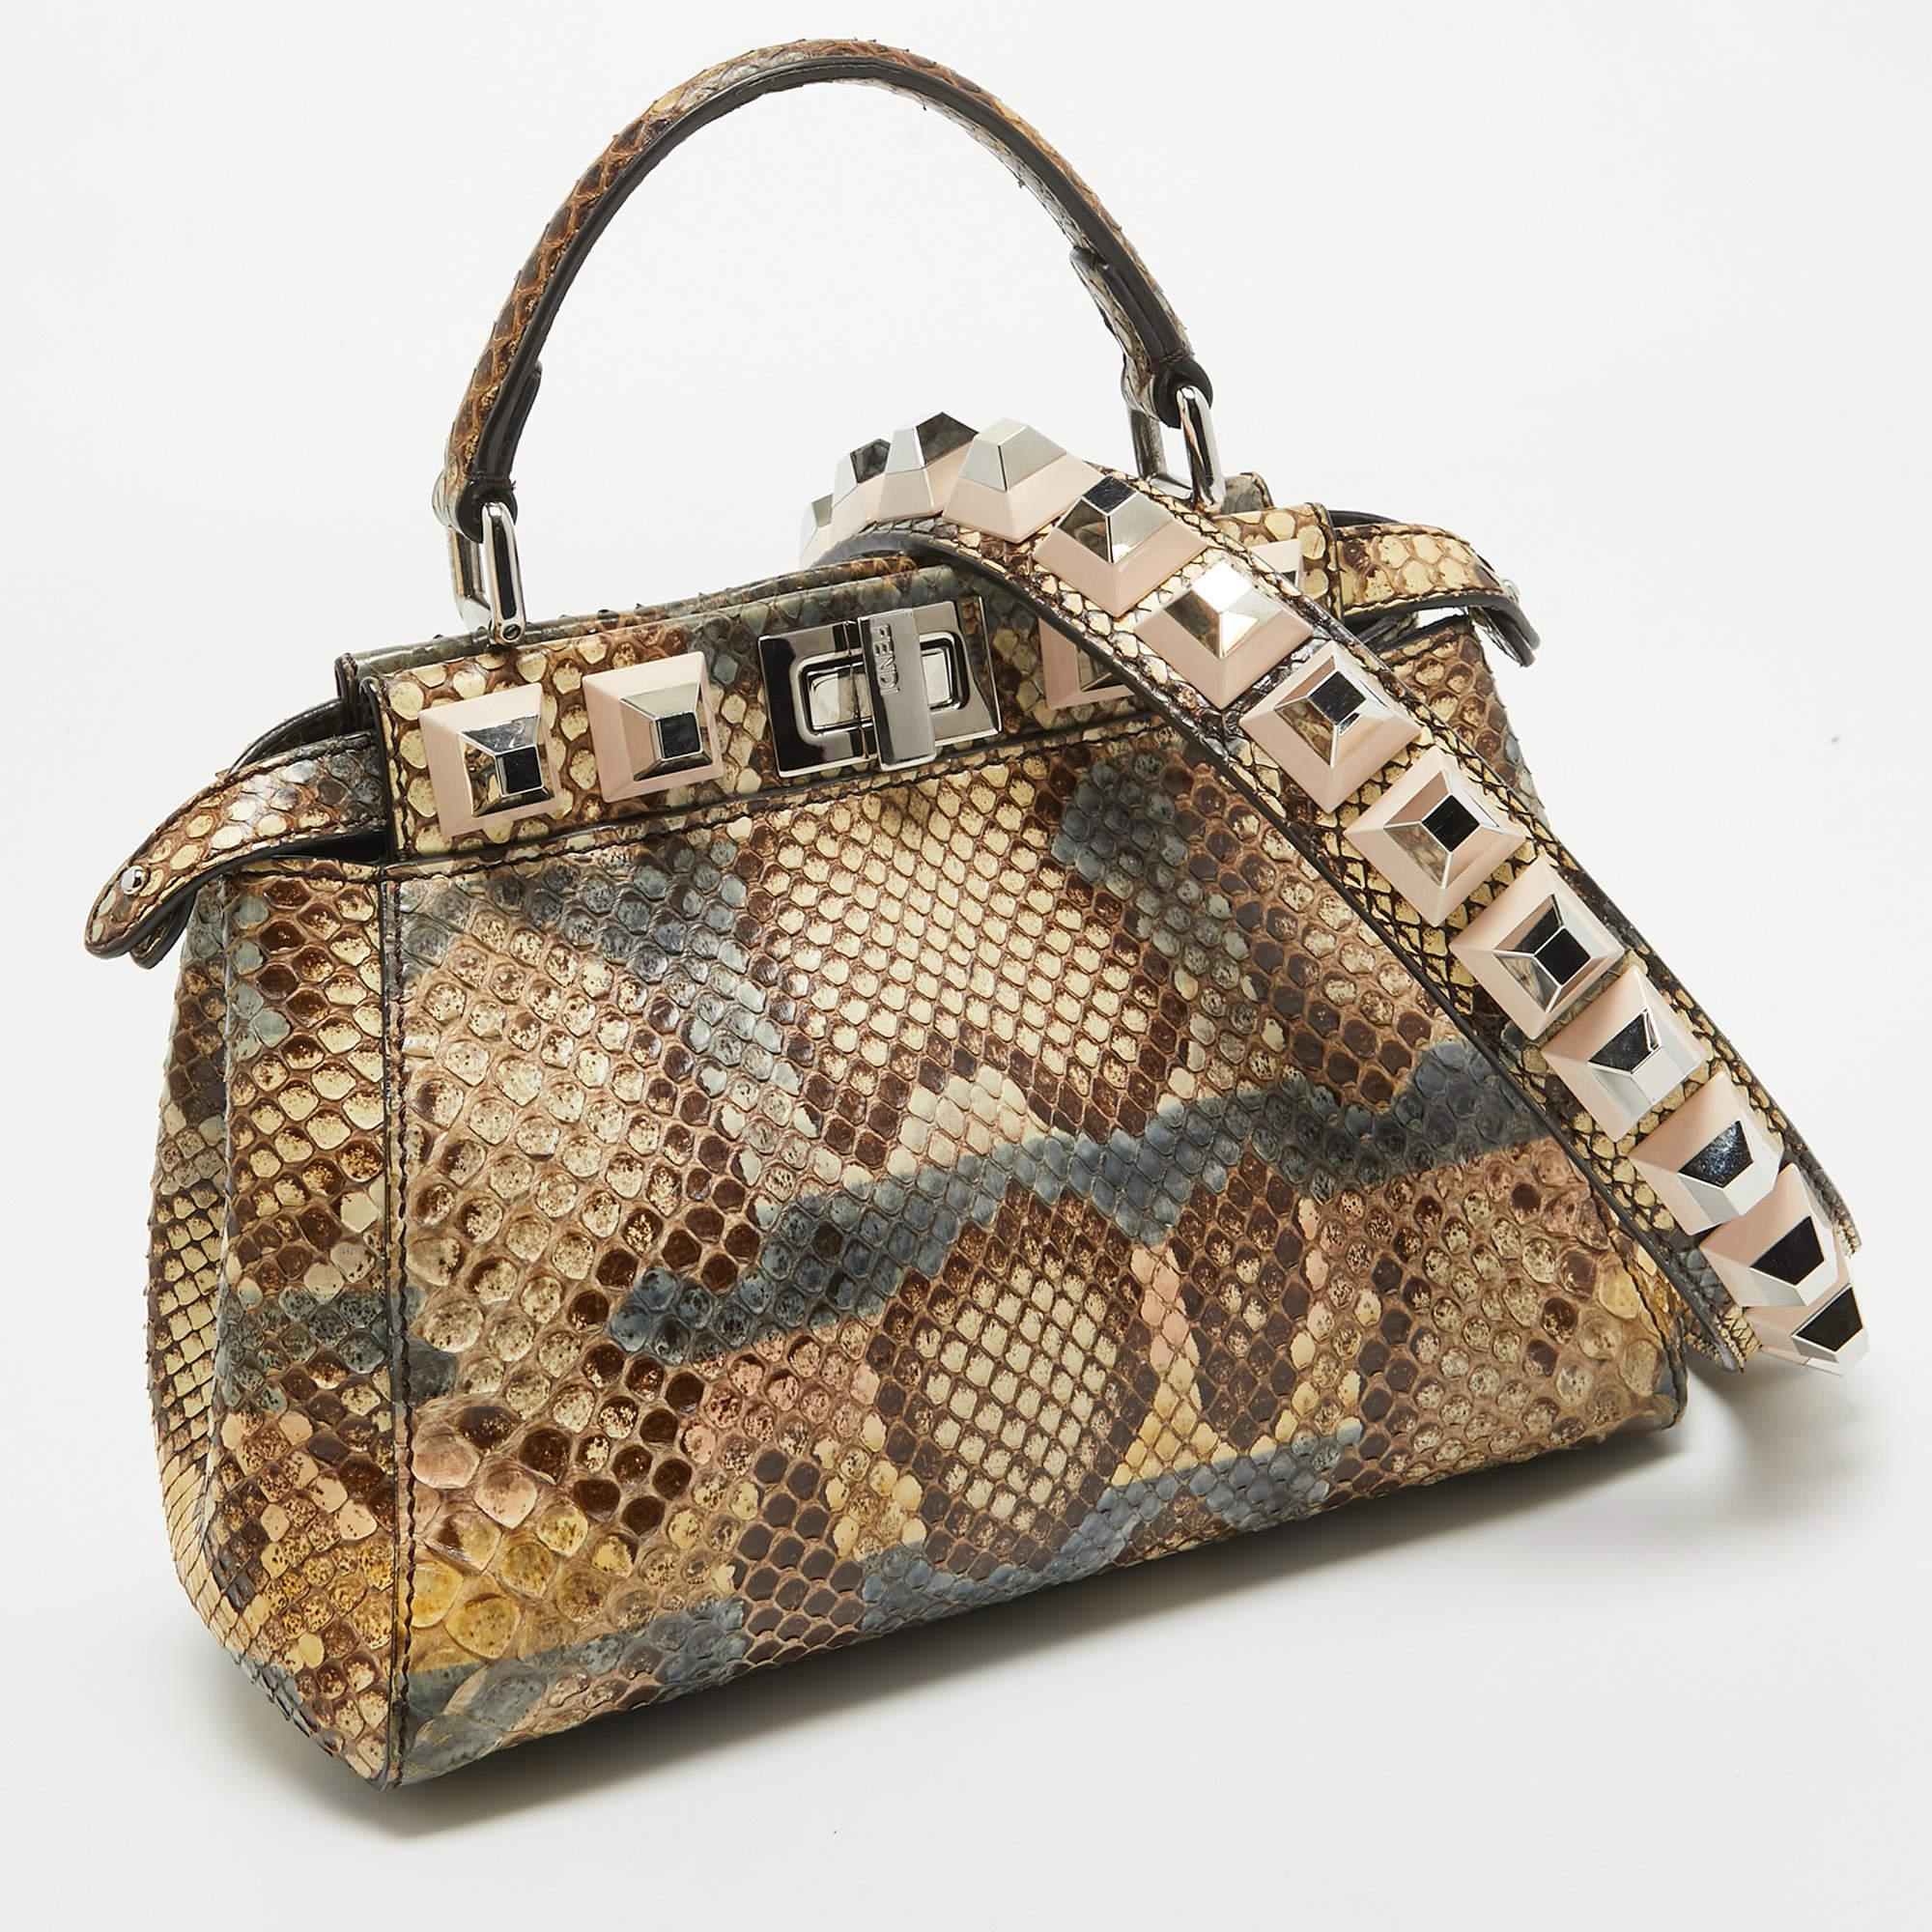 Designed by Venturini Fendi, the Peekaboo was first debuted in 2008. The unique construction and representation of this bag enable it to keep up with fashion's ever-changing tide. Constructed from python skin, it is complemented with silver-tone